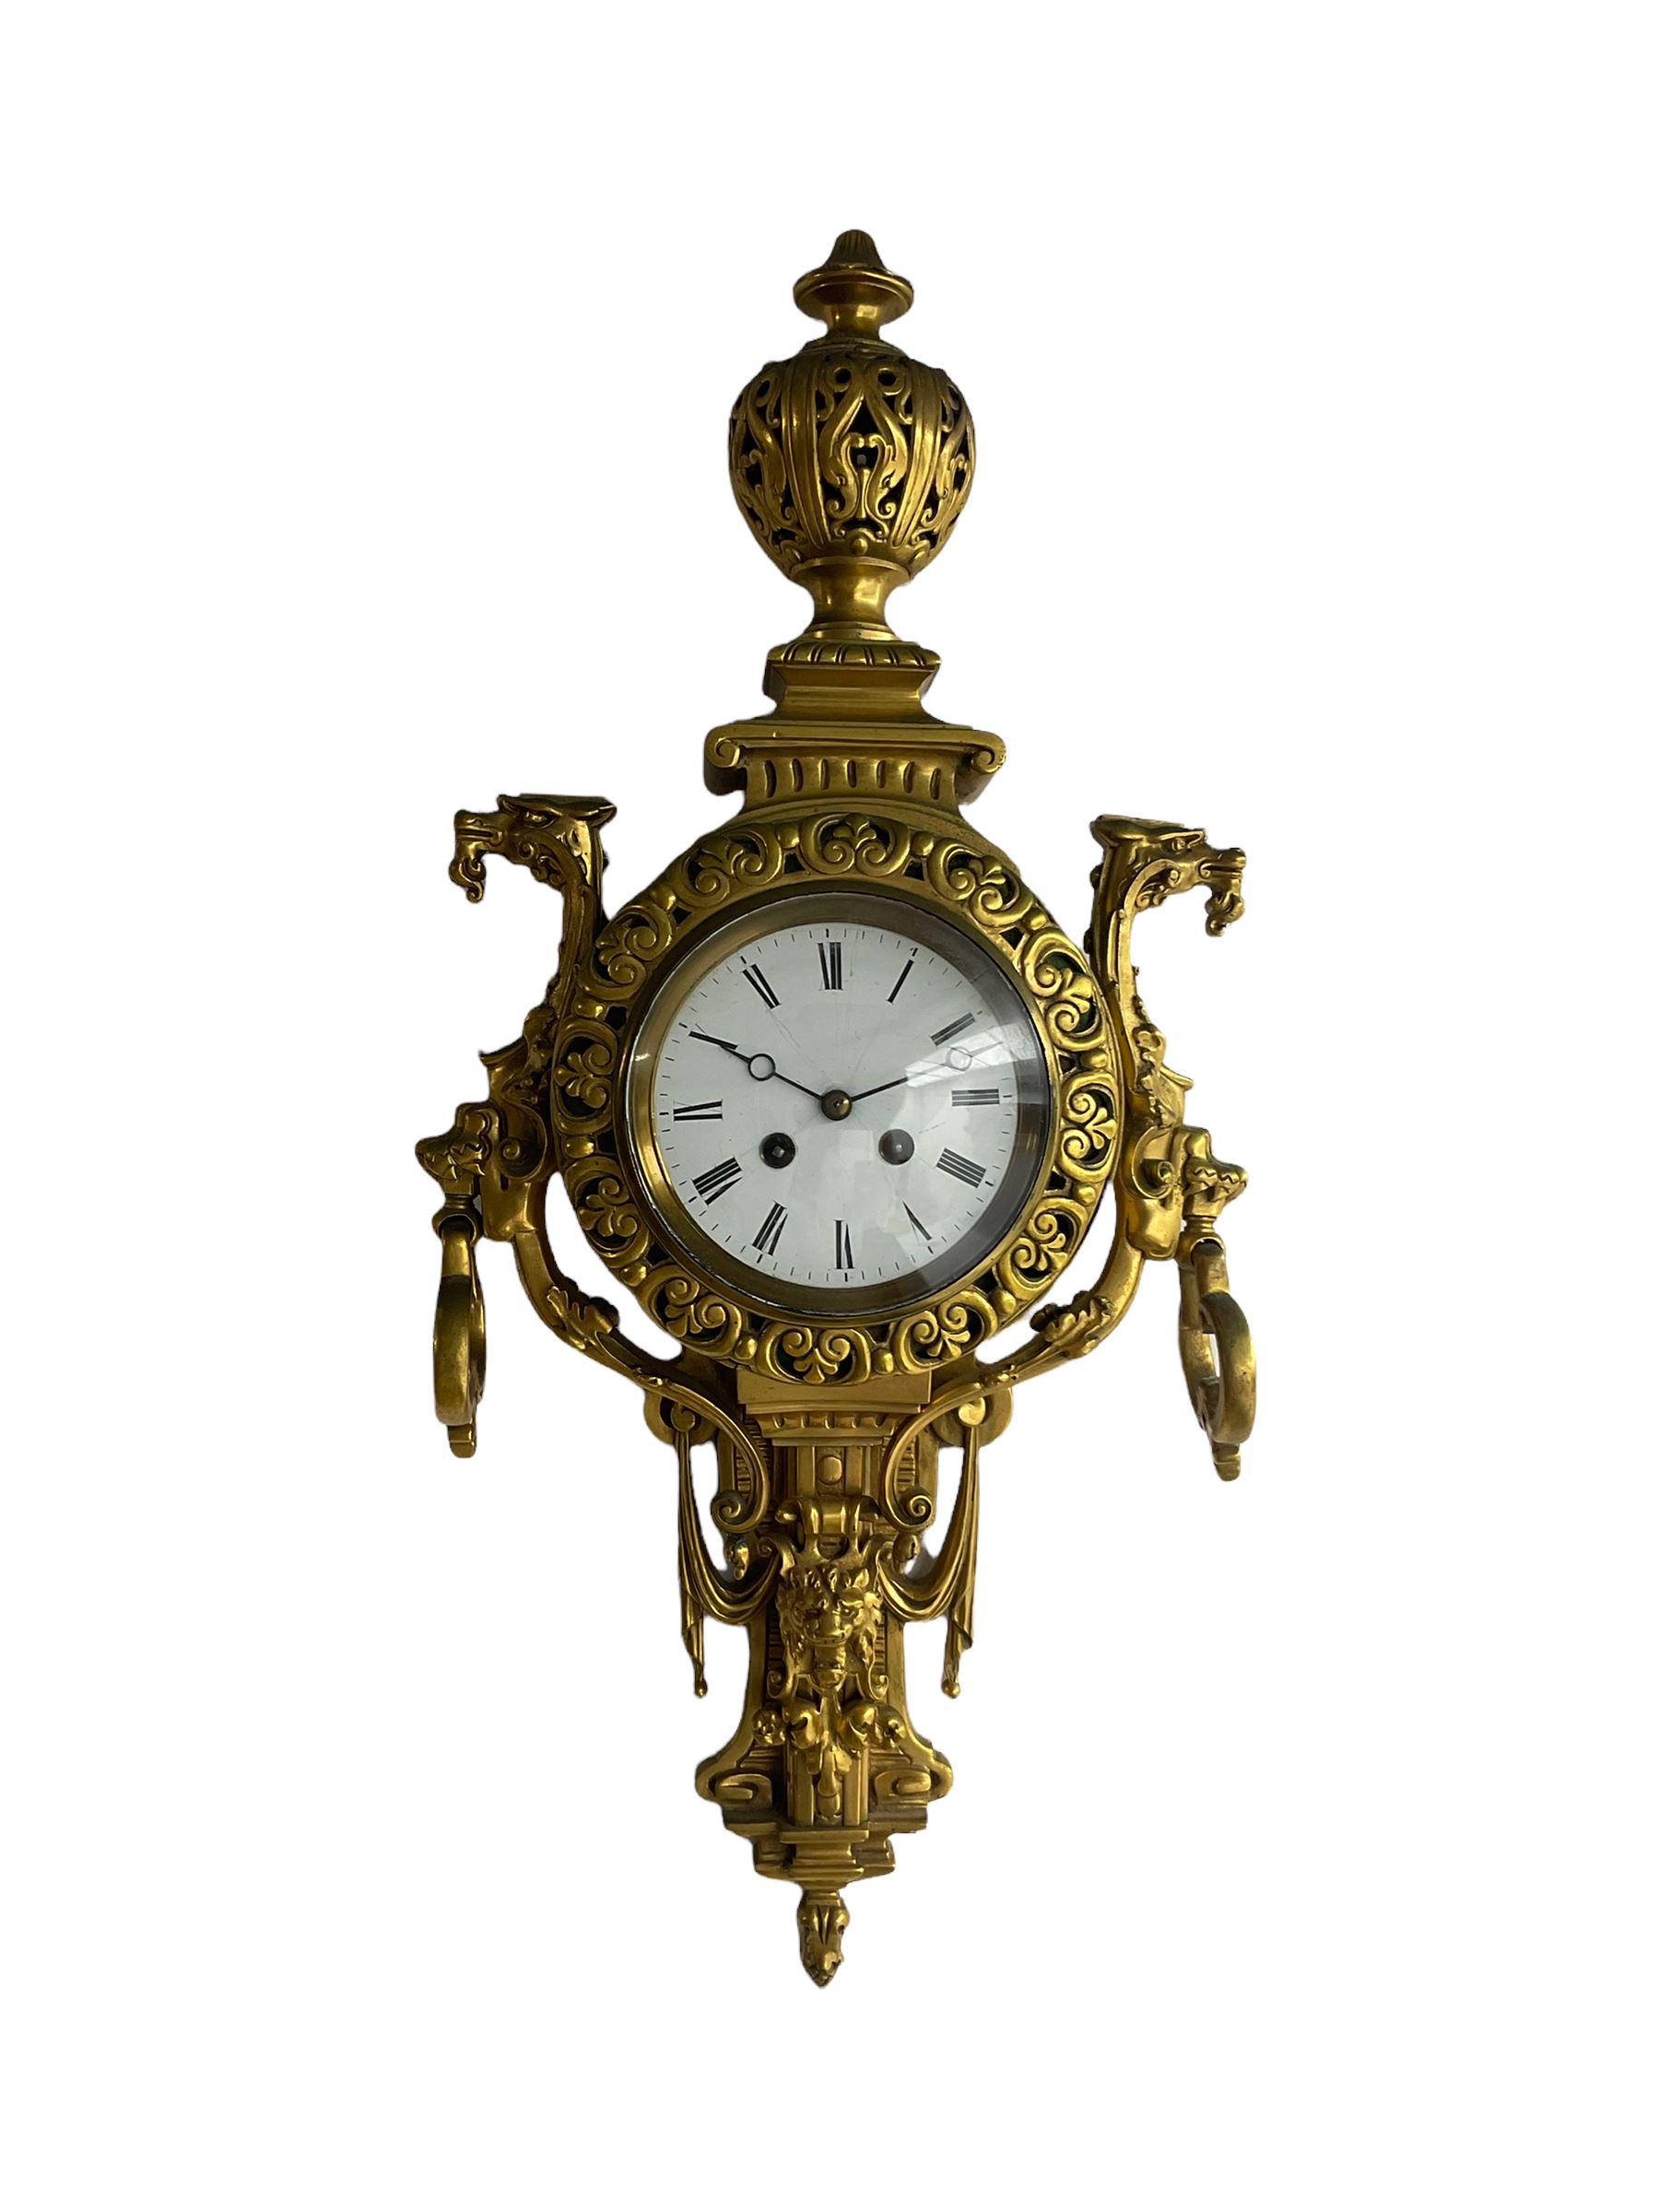 An imposing and decorative late 19th century French wall clock c1890